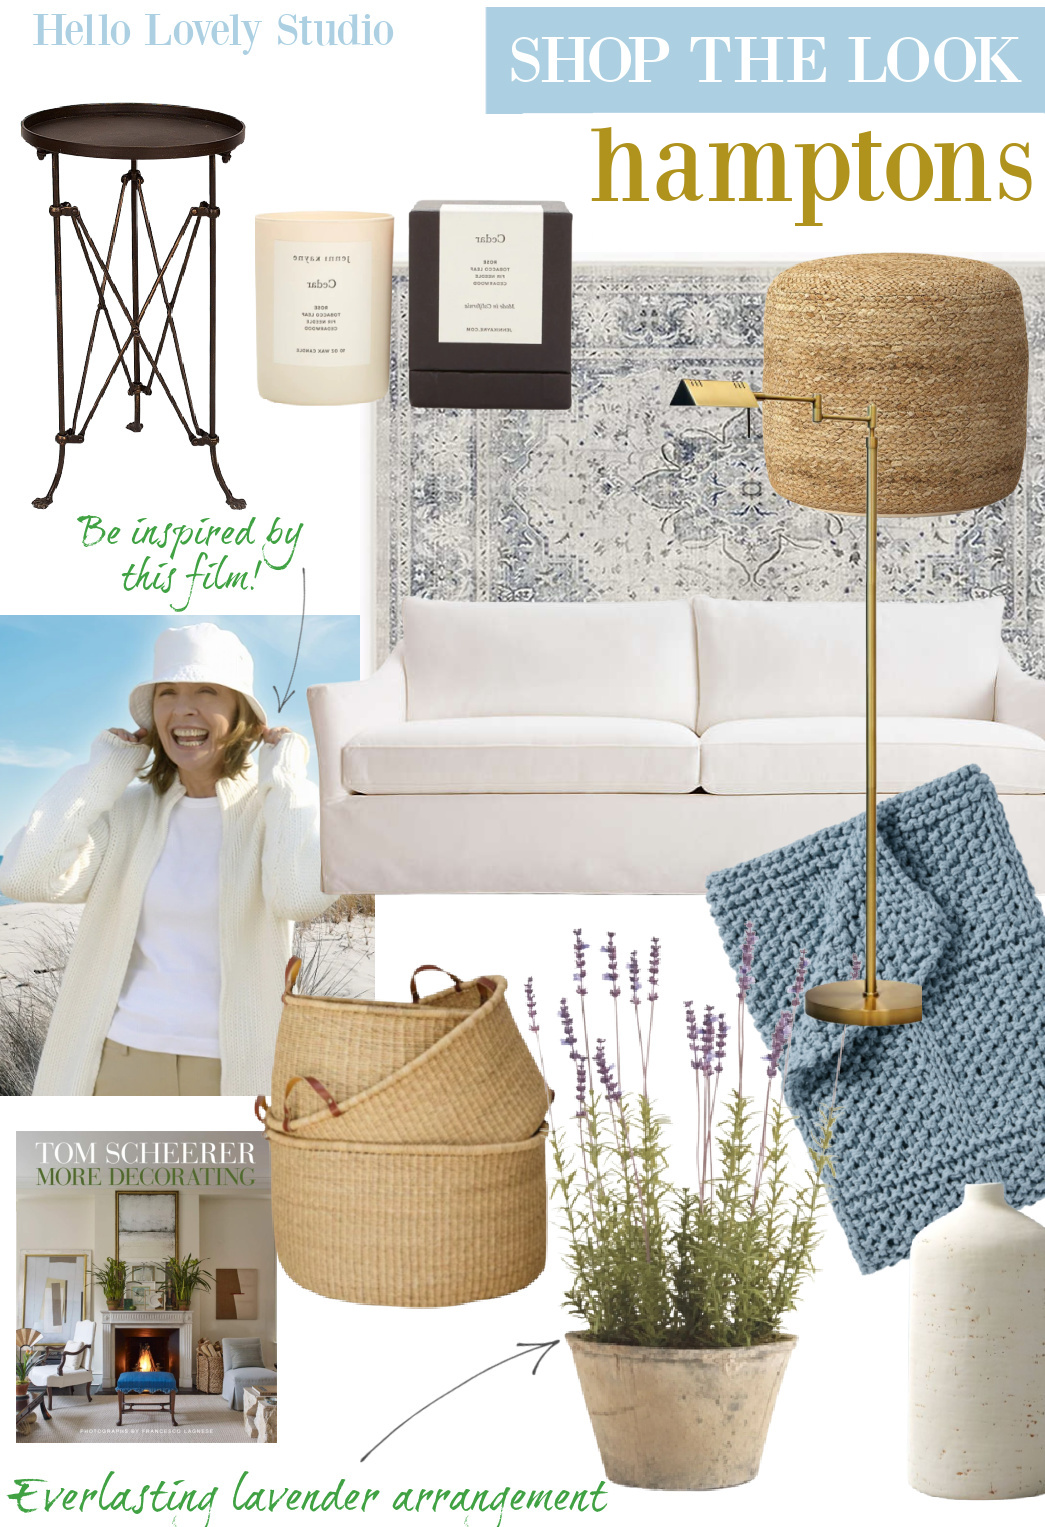 Coastal living furniture and decorating ideas on Hello Lovely.